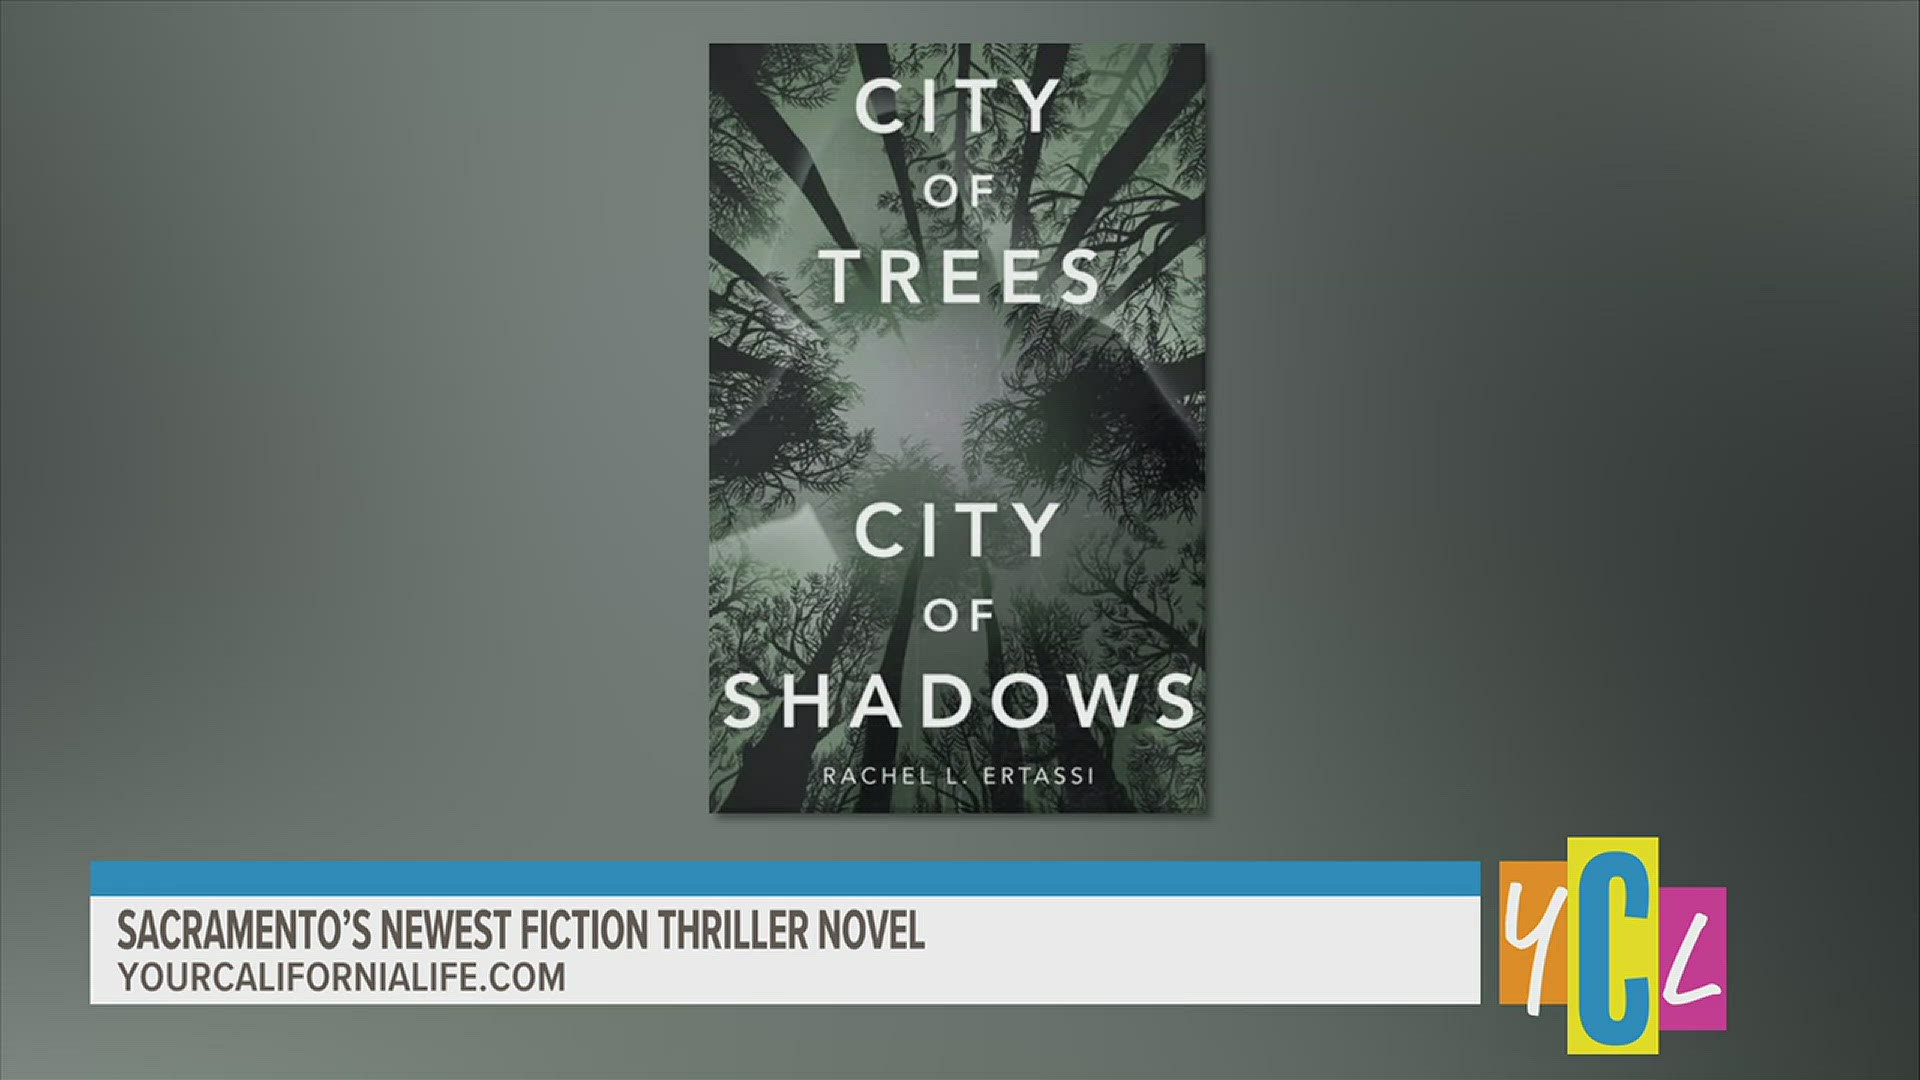 City of Trees, City of Shadows is a fiction thriller set in Sacramento. It is about a murderer in Midtown and how it affects the lives of the locals. Check it out!